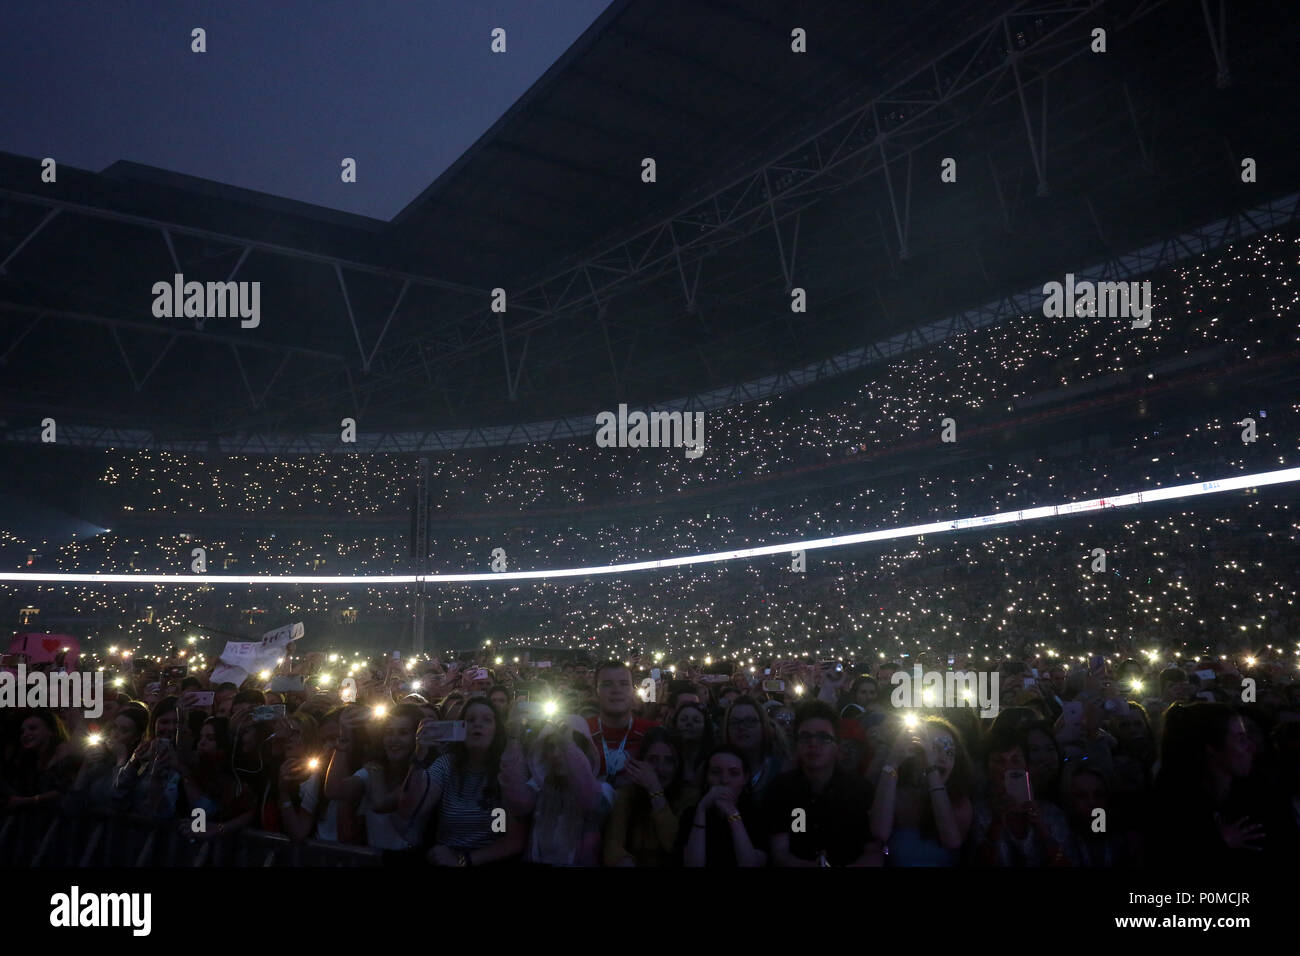 Fans in the crowd hold up their mobiles with the torches turned on during Capital's Summertime Ball with Vodafone at Wembley Stadium, London. PRESS ASSOCIATION Photo. This summer's hottest artists performed live for 80,000 Capital listeners at Wembley Stadium at the UK's biggest summer party. Performers included Camila Cabello, Shawn Mendes, Rita Ora, Charlie Puth, Jess Glyne, Craig David, Anne-Marie, Rudimental, Sean Paul, Clean Bandit, James Arthur, Sigala, Years & Years, Jax Jones, Raye, Jonas Blue, Mabel, Stefflon Don, Yungen and G-Eazy. Picture date: Saturday June 9, 2018. Photo credit sh Stock Photo